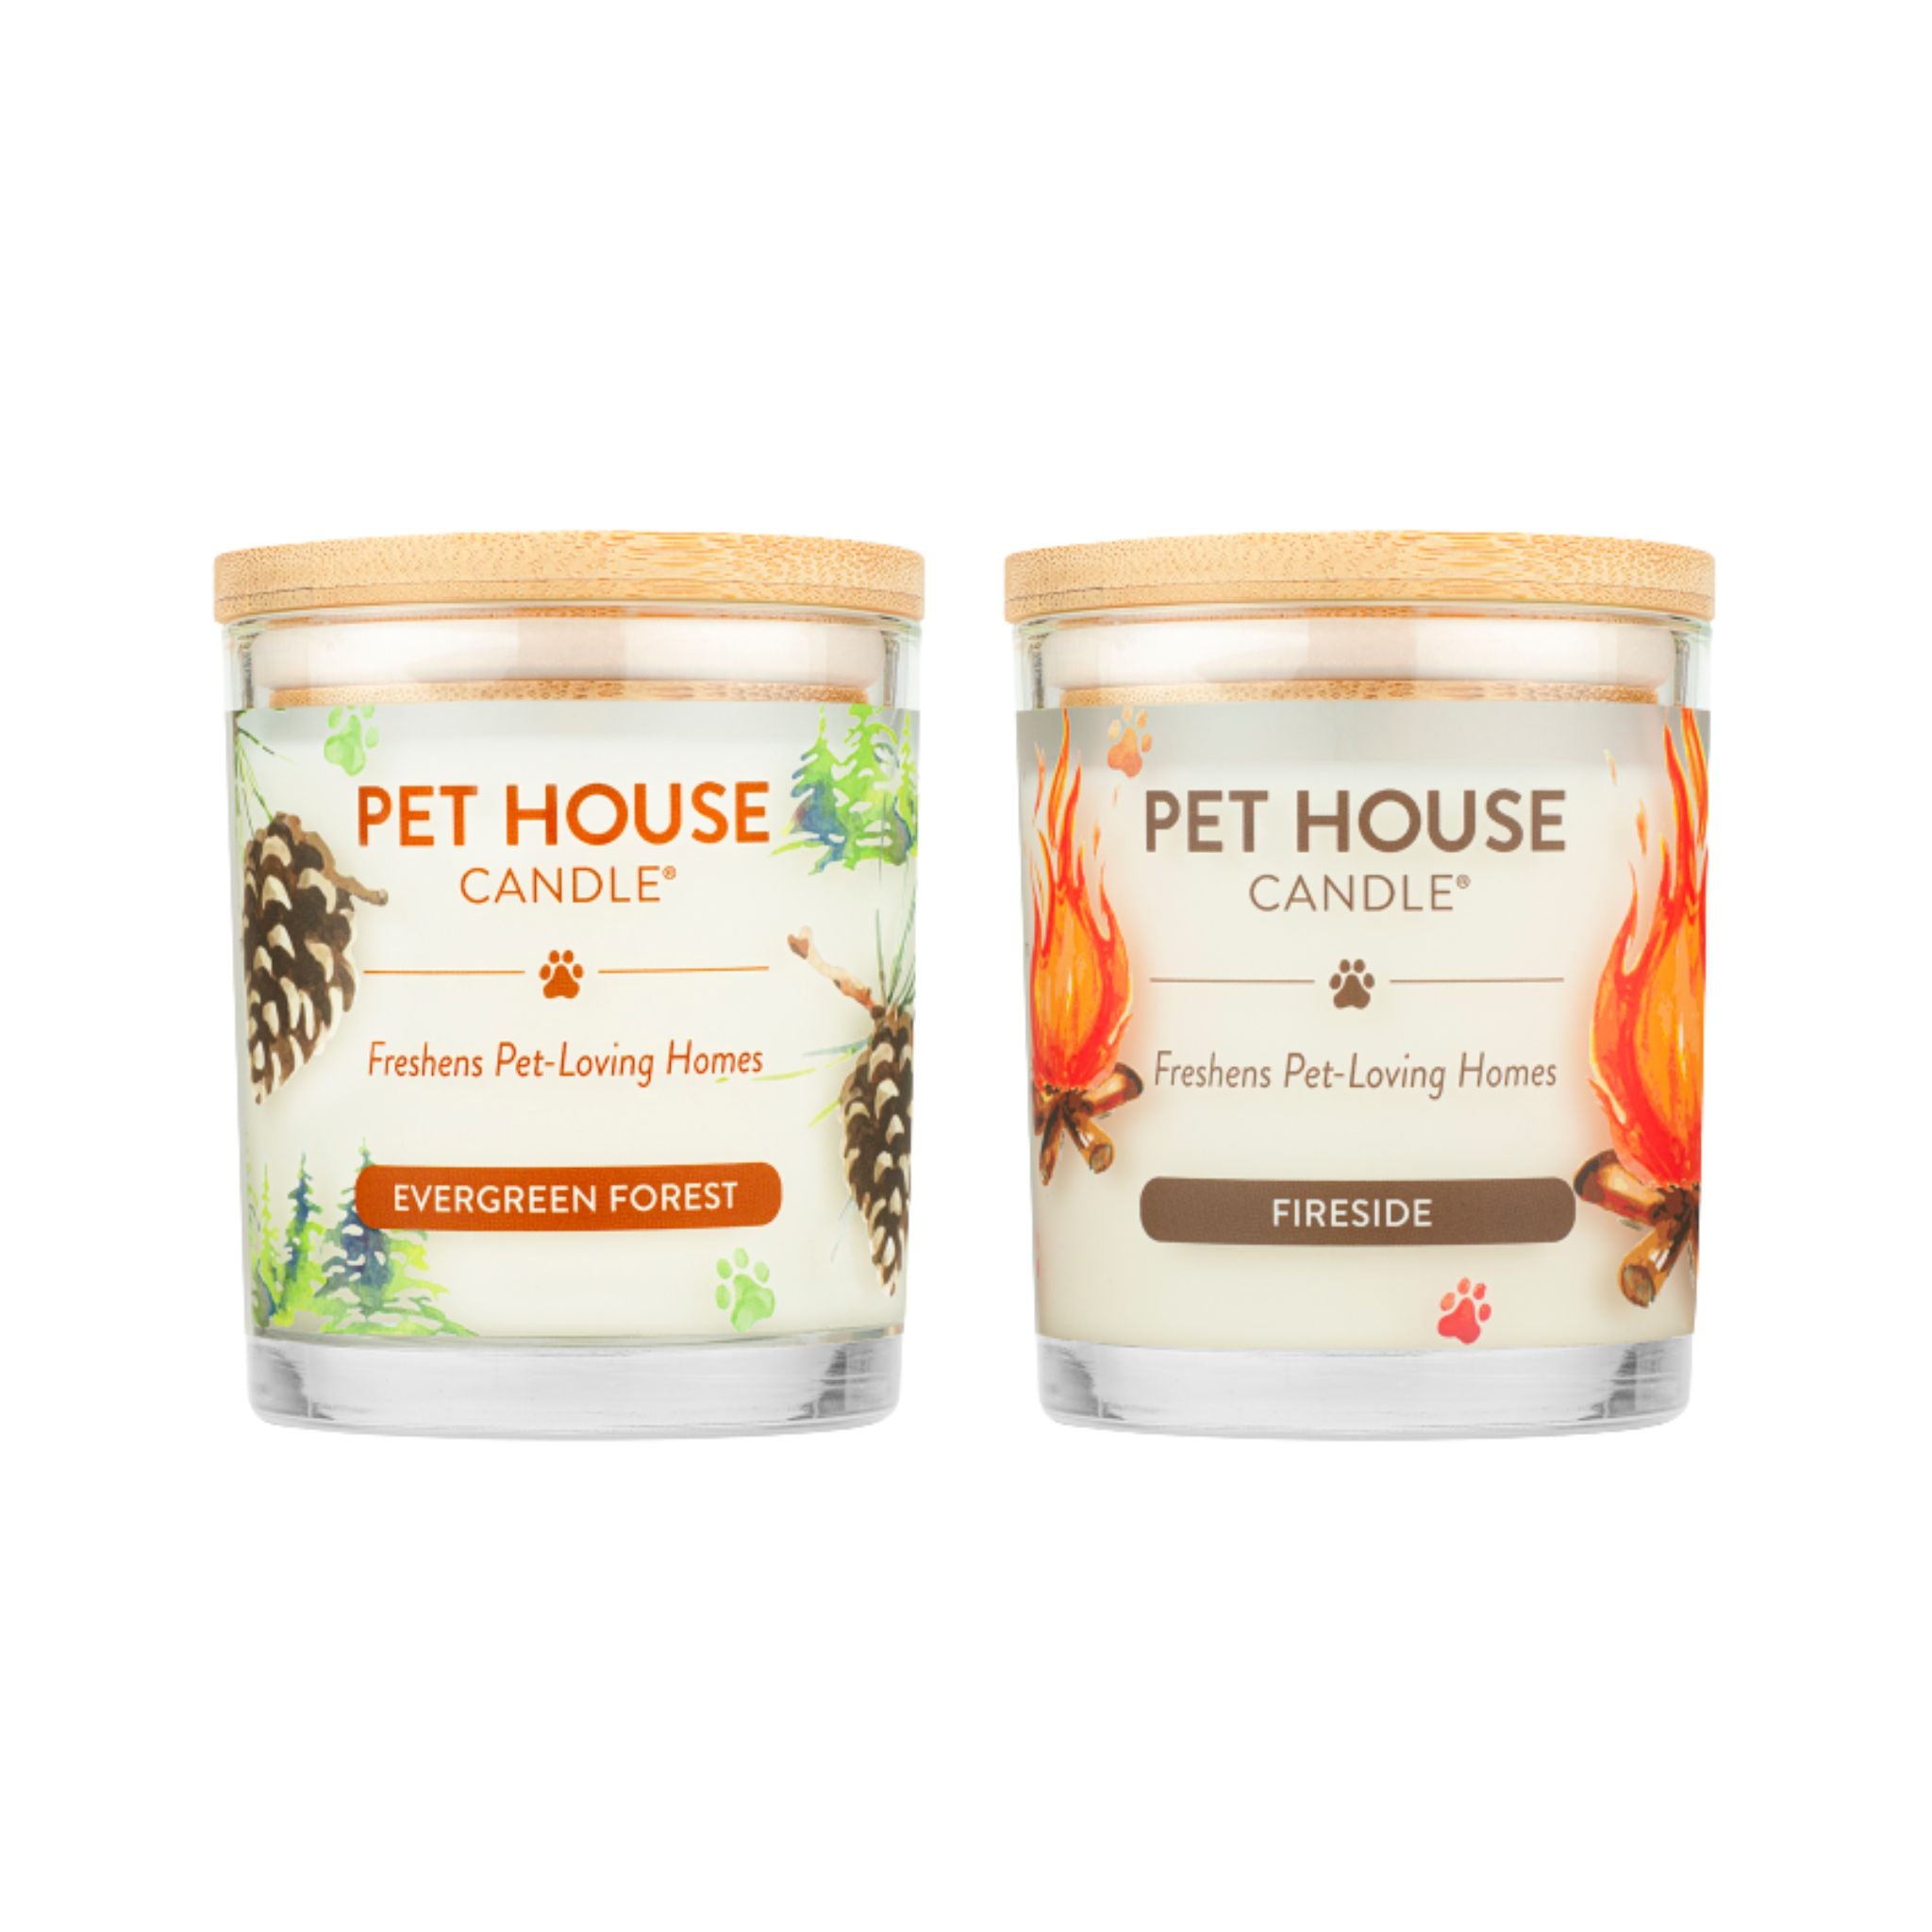 Evergreen Forest and Fireside - Pack of 2 Candles